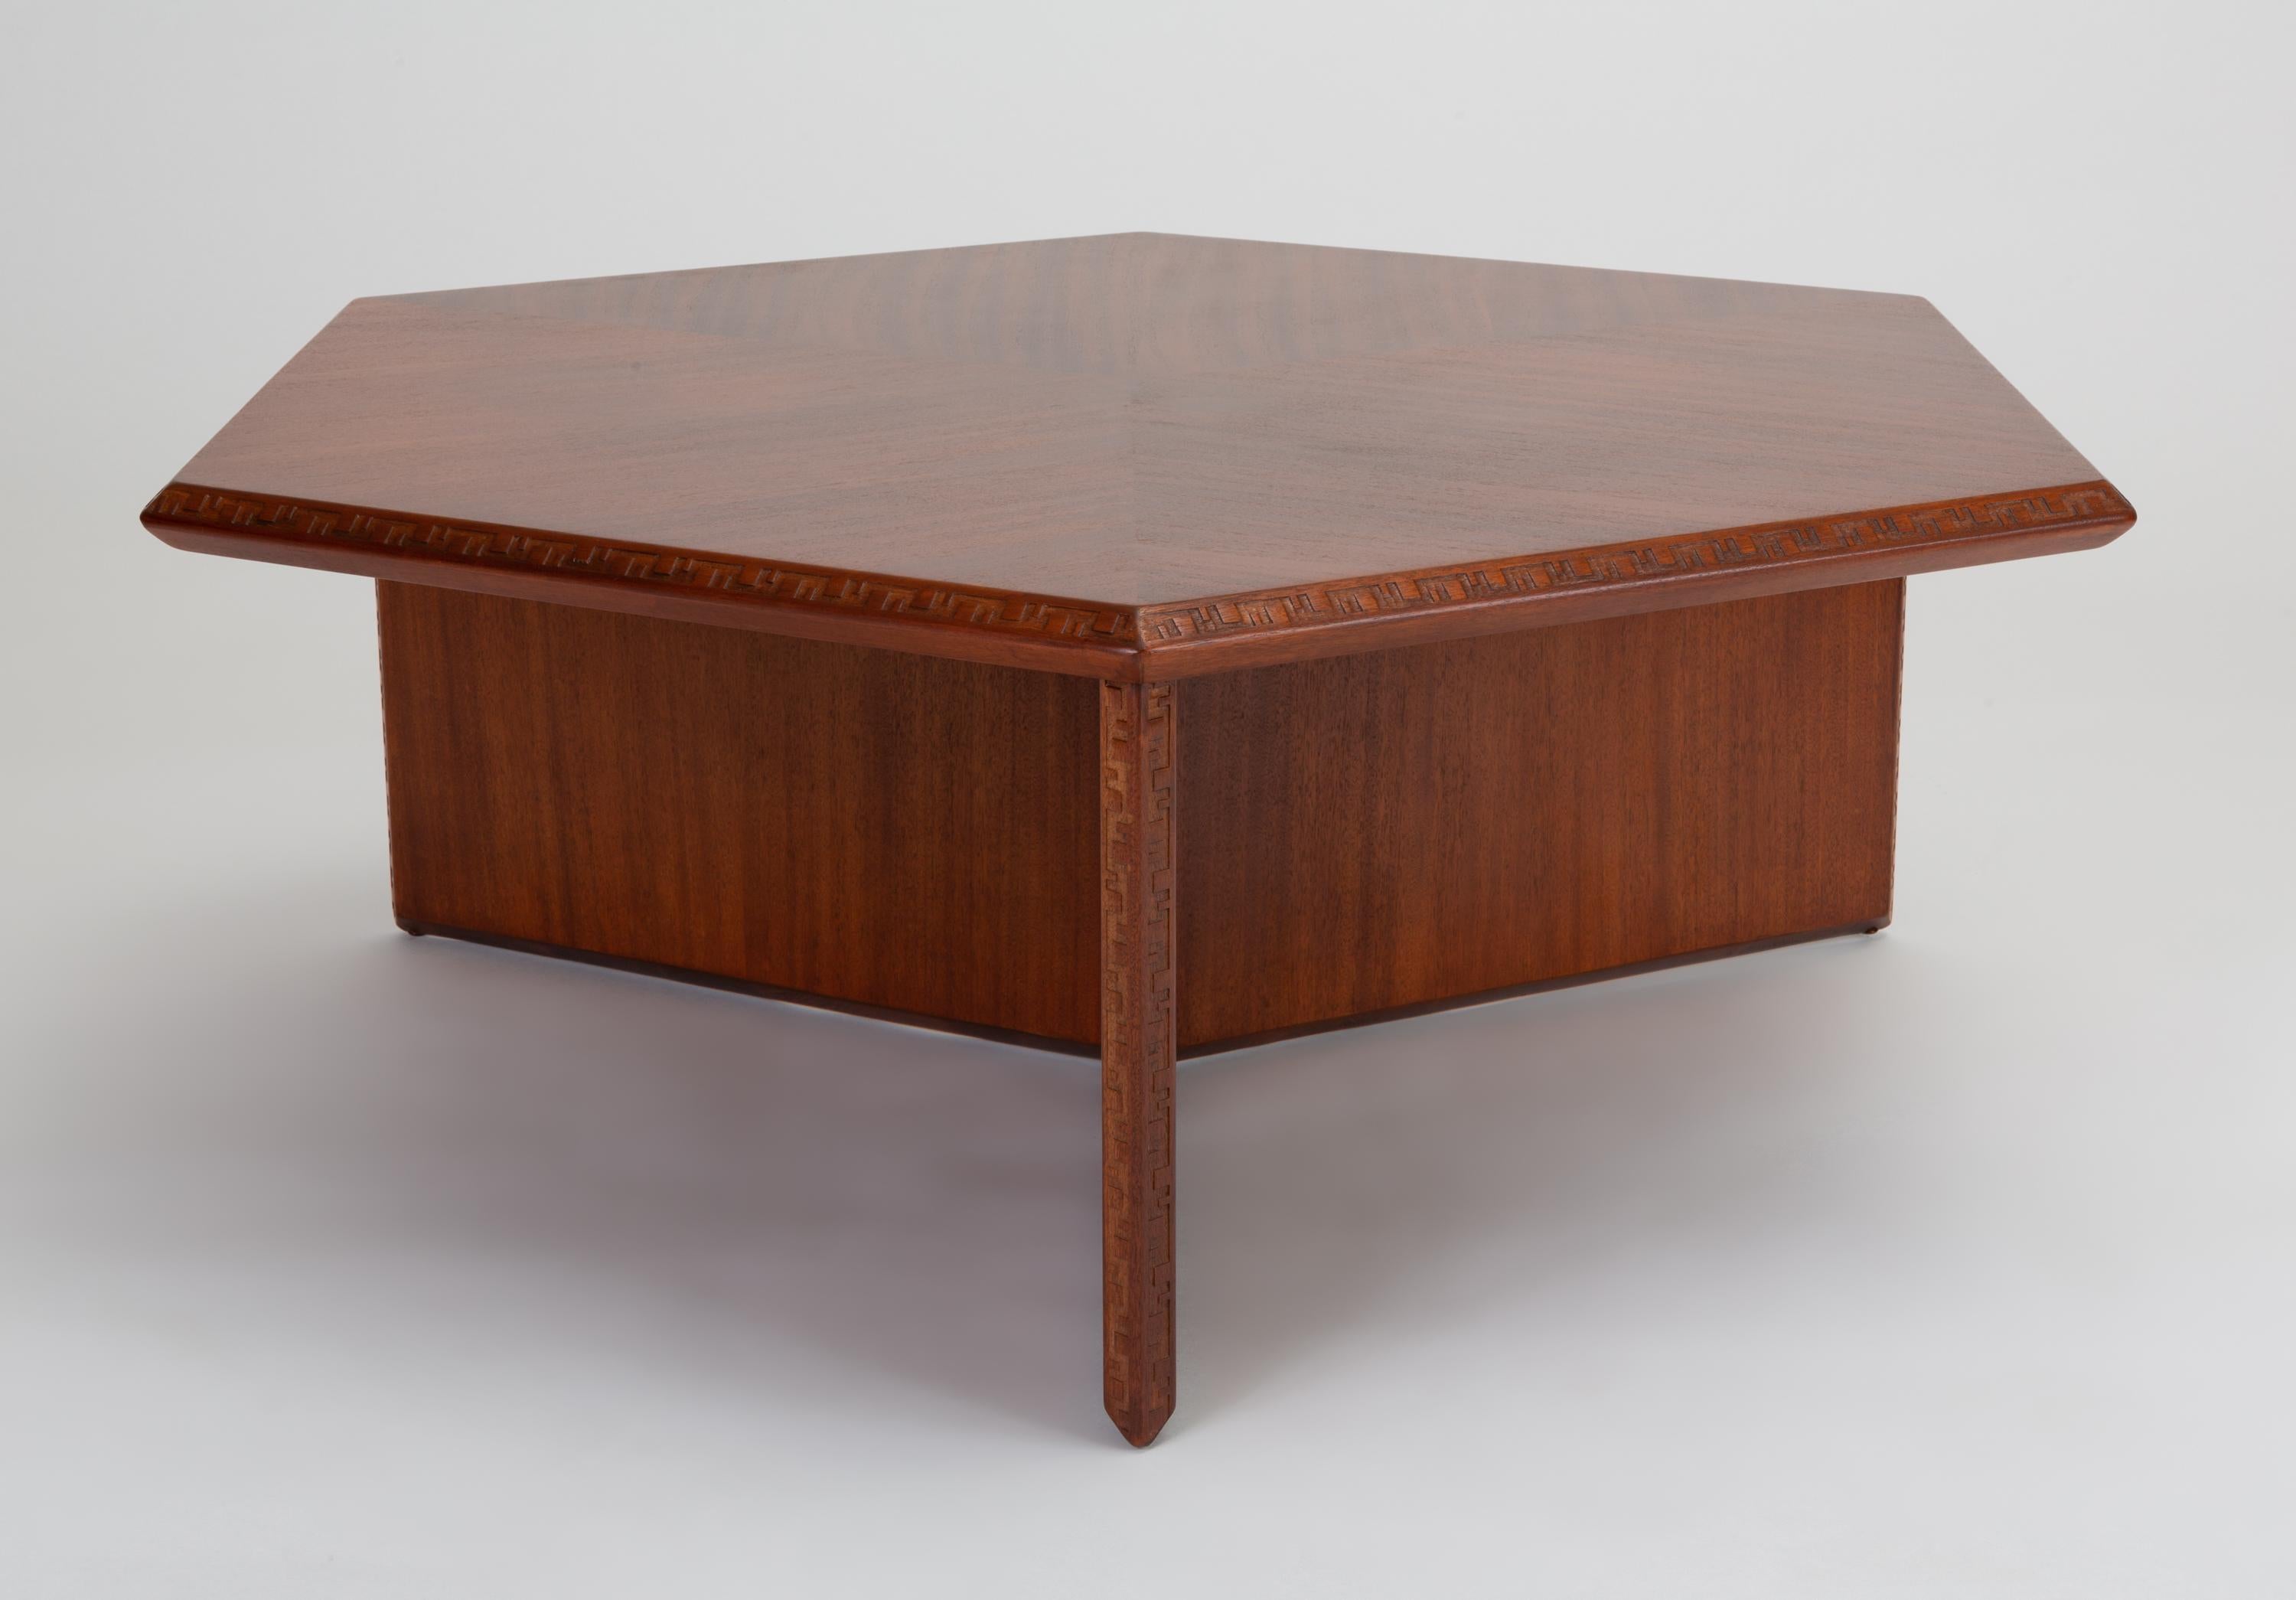 A hexagonal coffee table in Honduran mahogany designed by Frank Lloyd Wright for Heritage-Henredon in 1955. One of three furniture lines submitted to Henredon, each based around a different geometric module, the hexagonal Taliesin line was the only